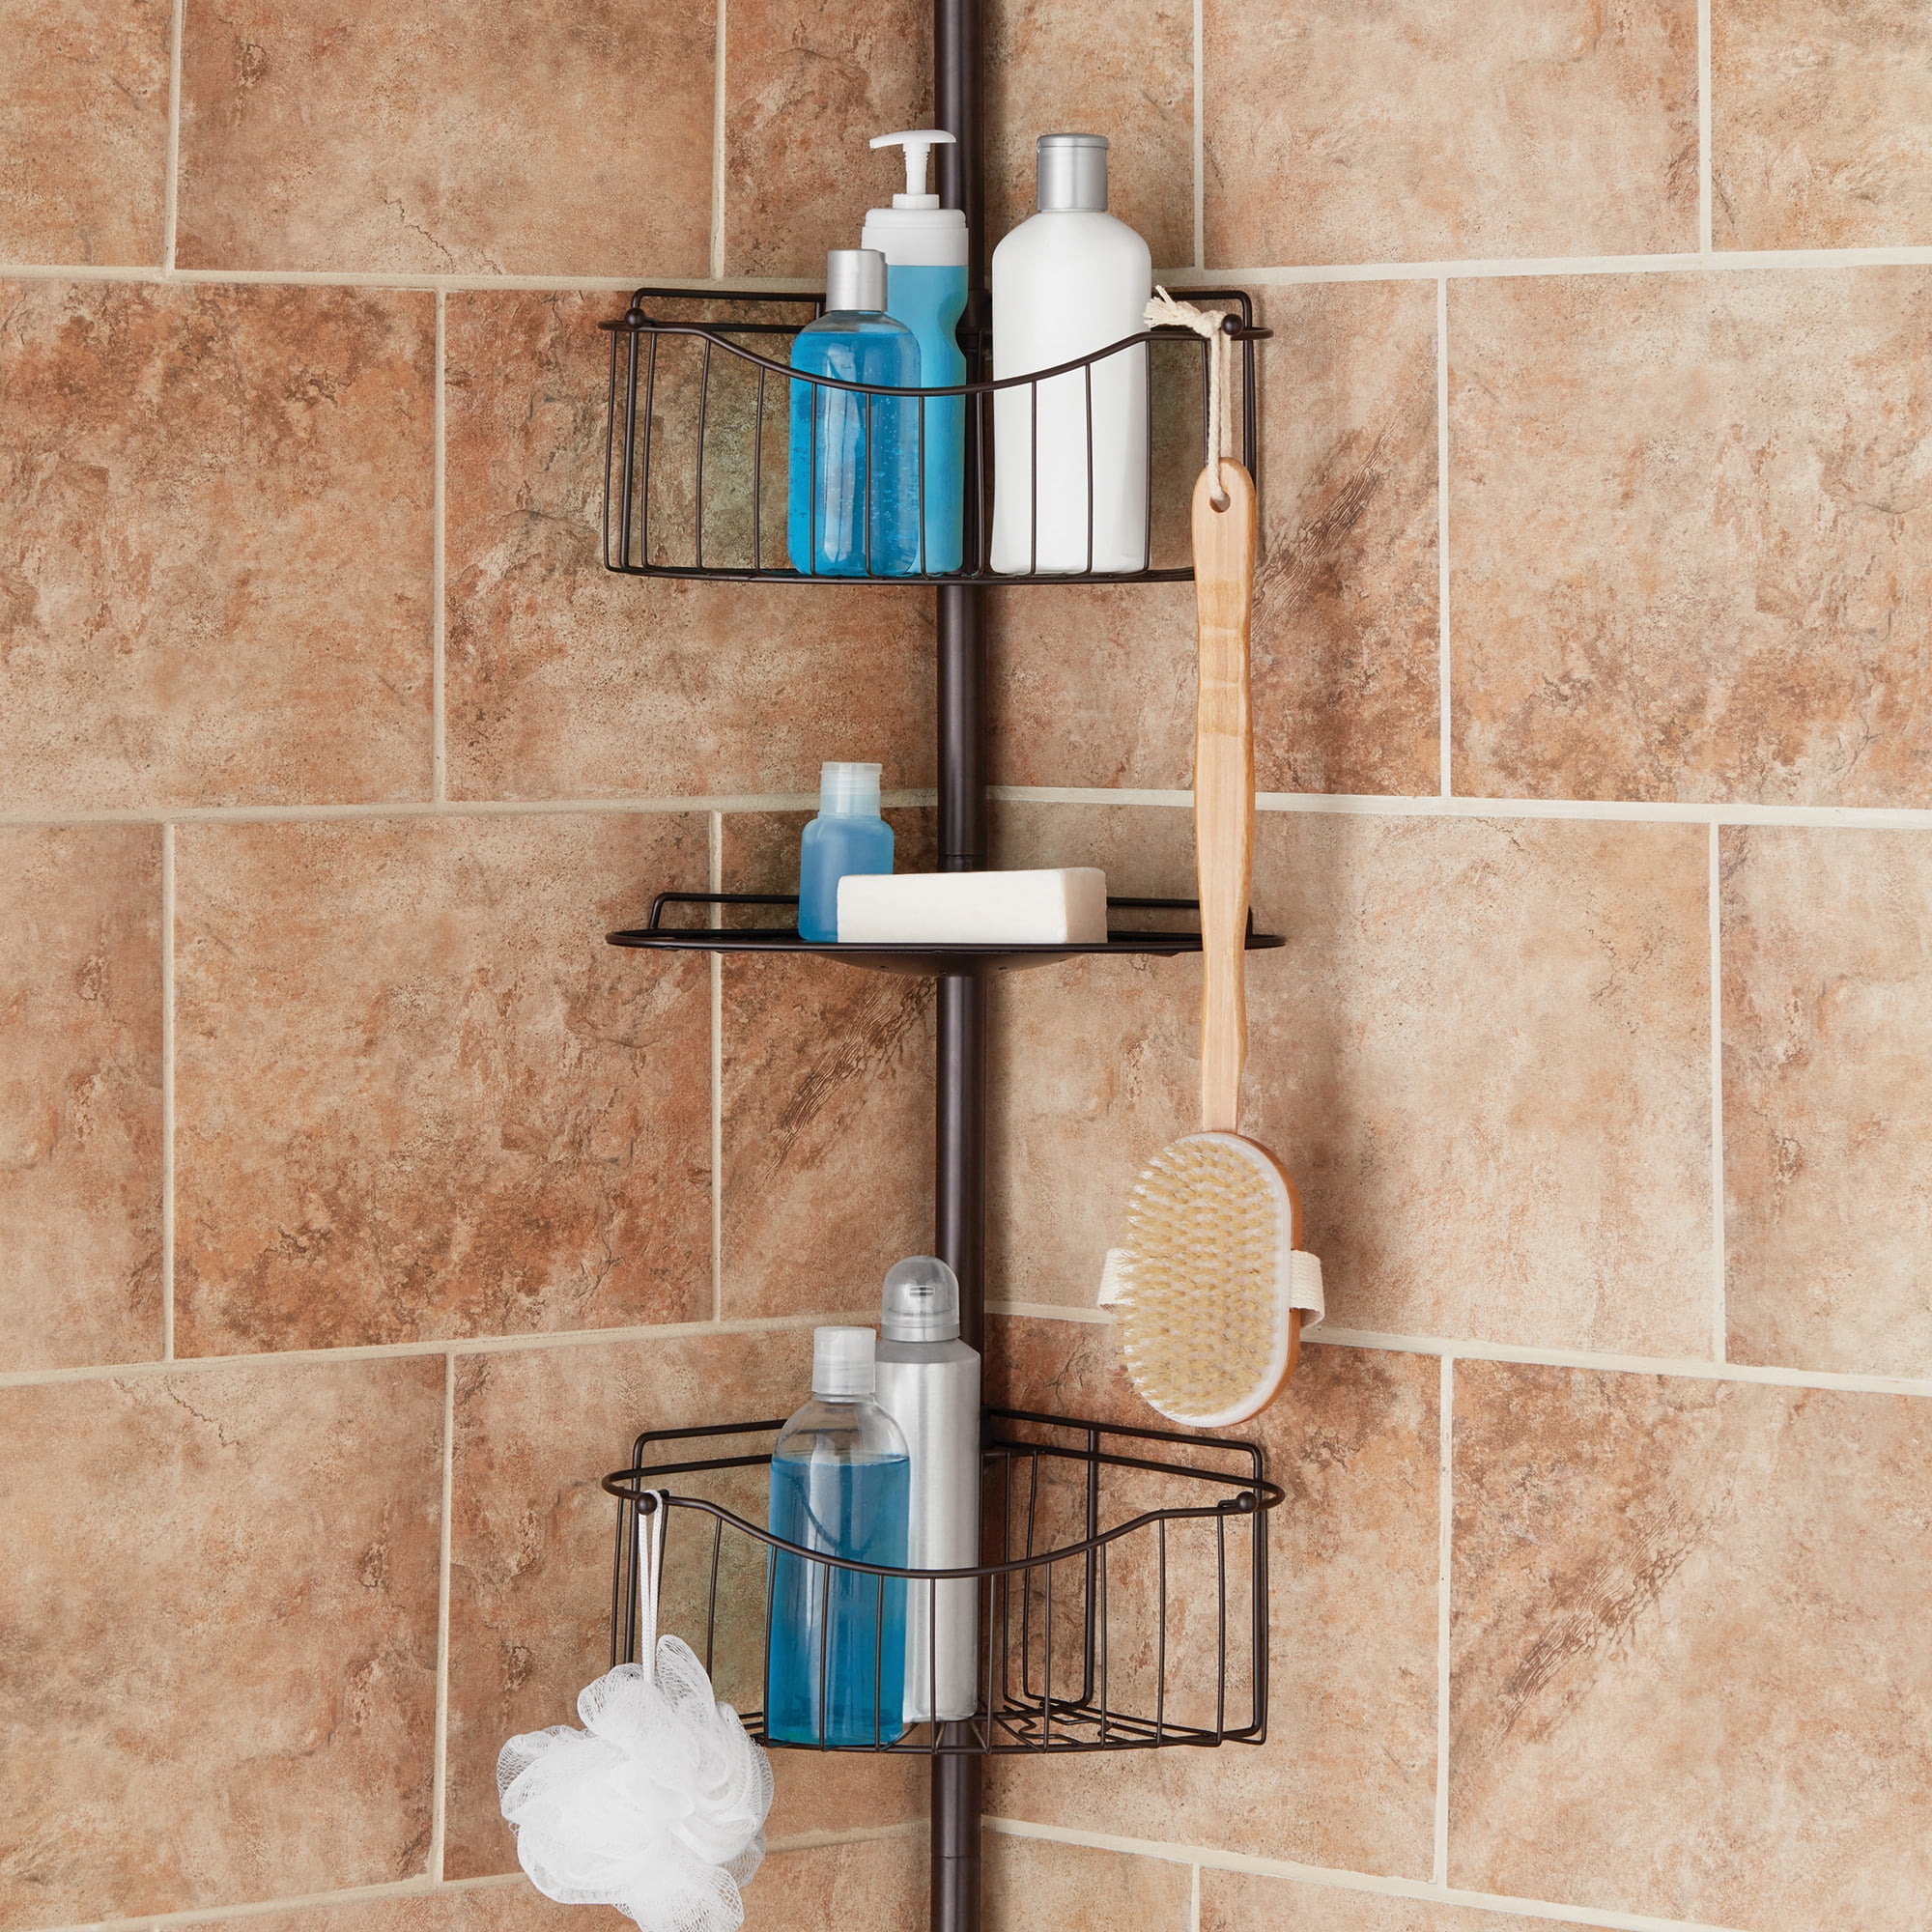 Mainstays 3-Shelf Tension Pole Shower Caddy, Oil-Rubbed Bronze, Size: 60 inch - 97 inch